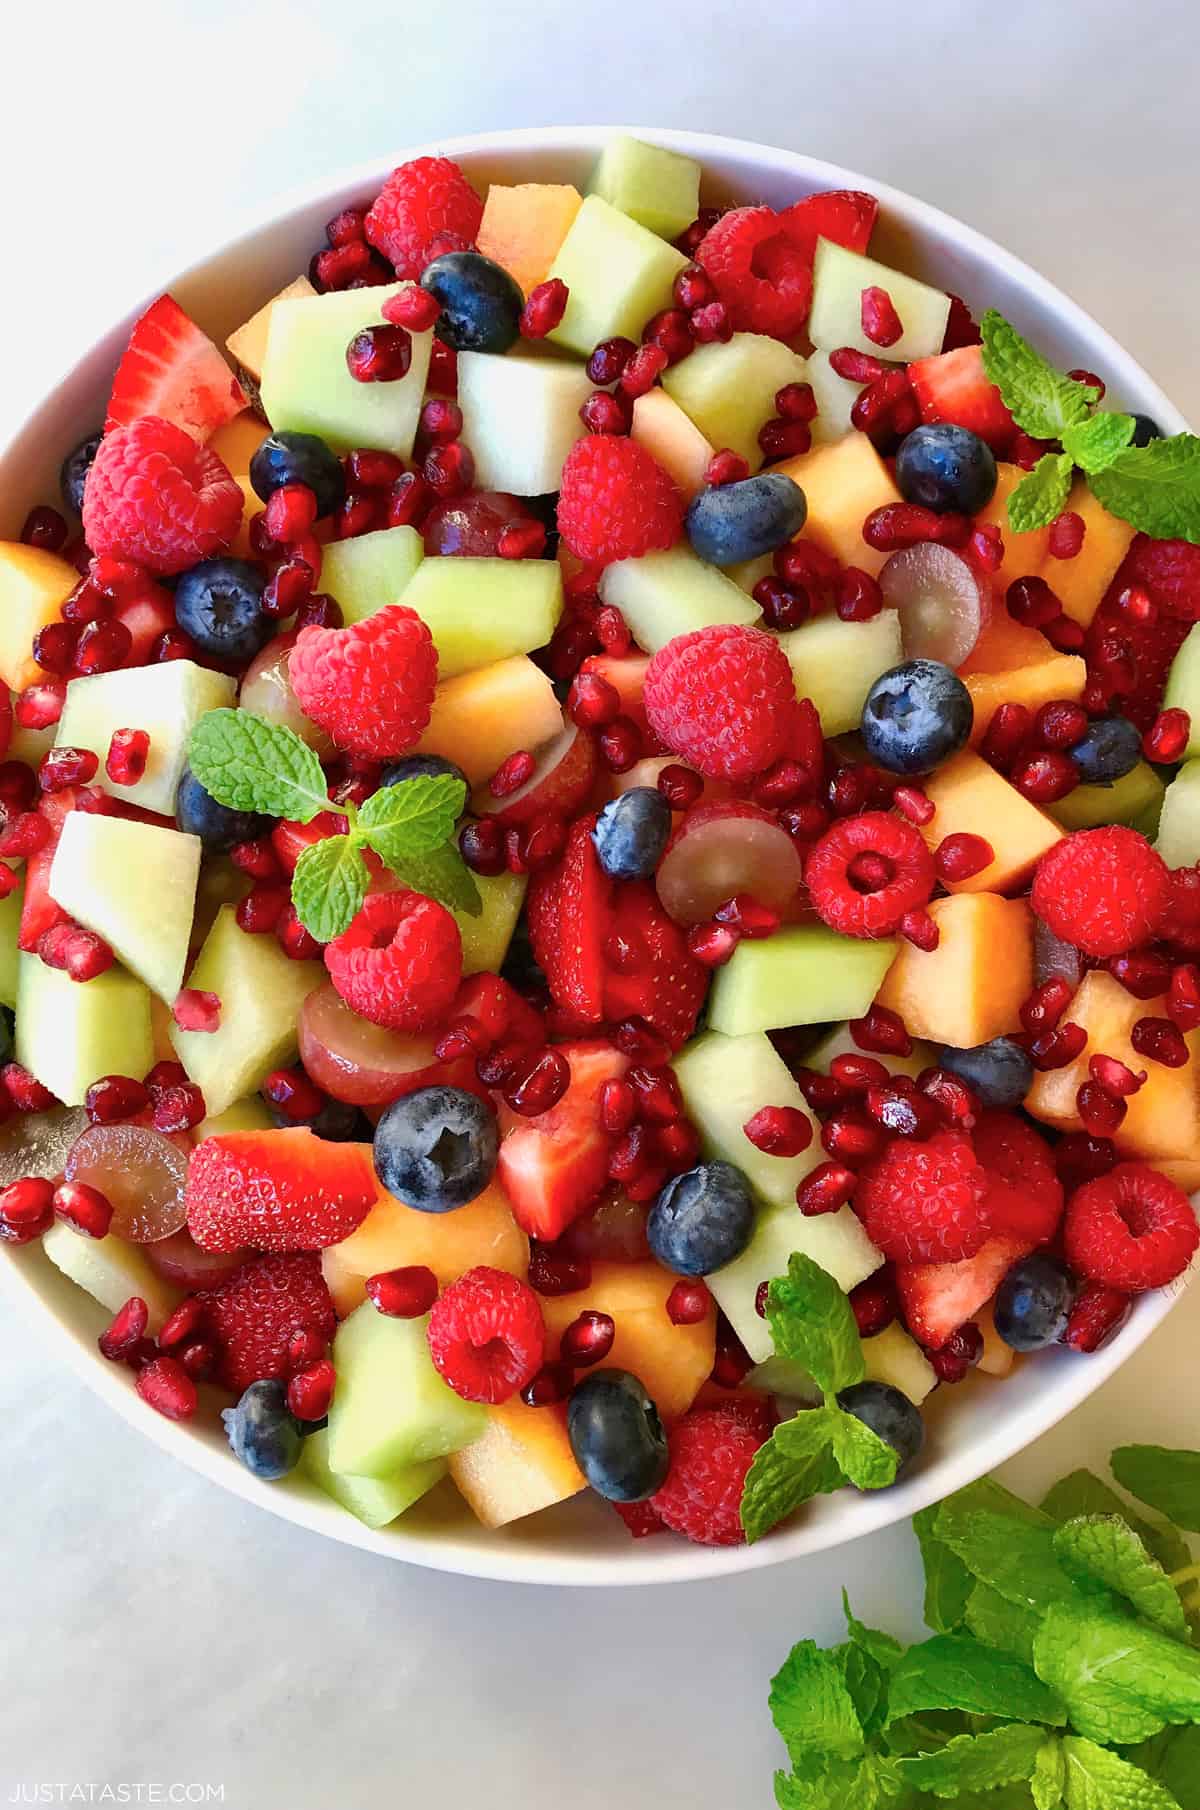 A large serving bowl containing fruit salad with diced cantaloupe and honeydew melon, blueberries, raspberries and pomegranate arils.